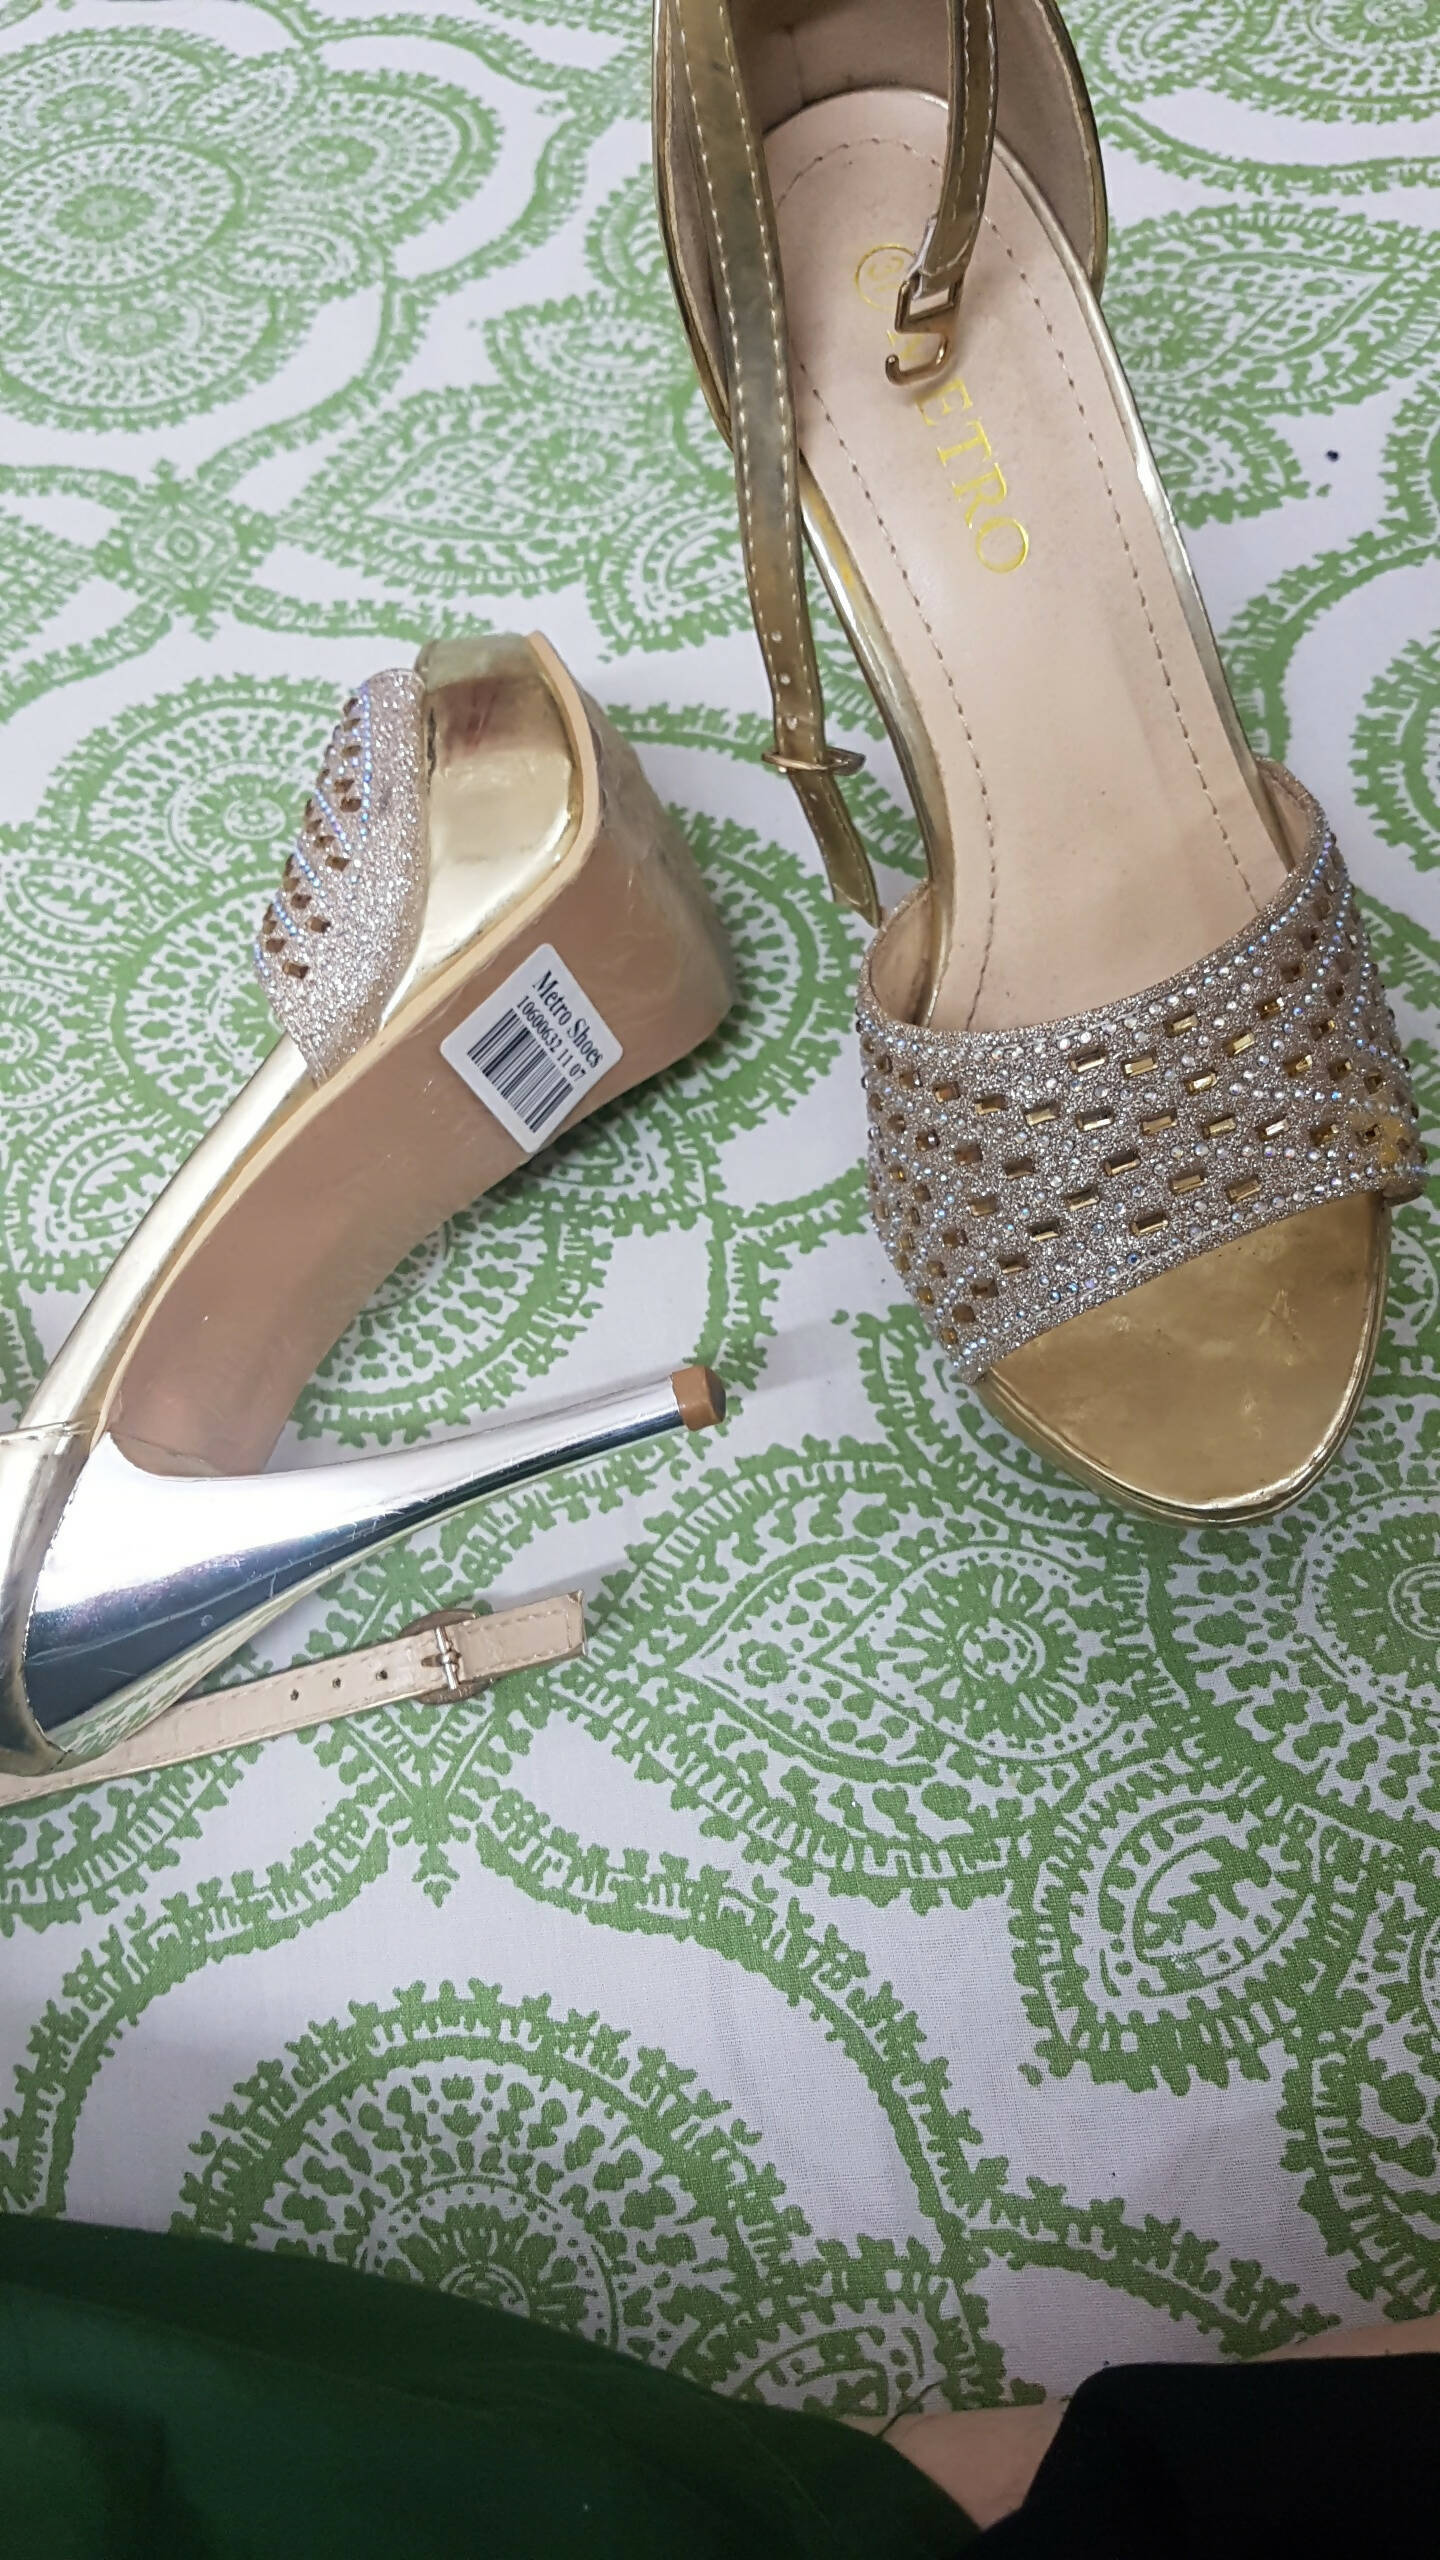 Metro | Women Heavy Heels | Women Shoes | Size: 37 | Brand New with Tags